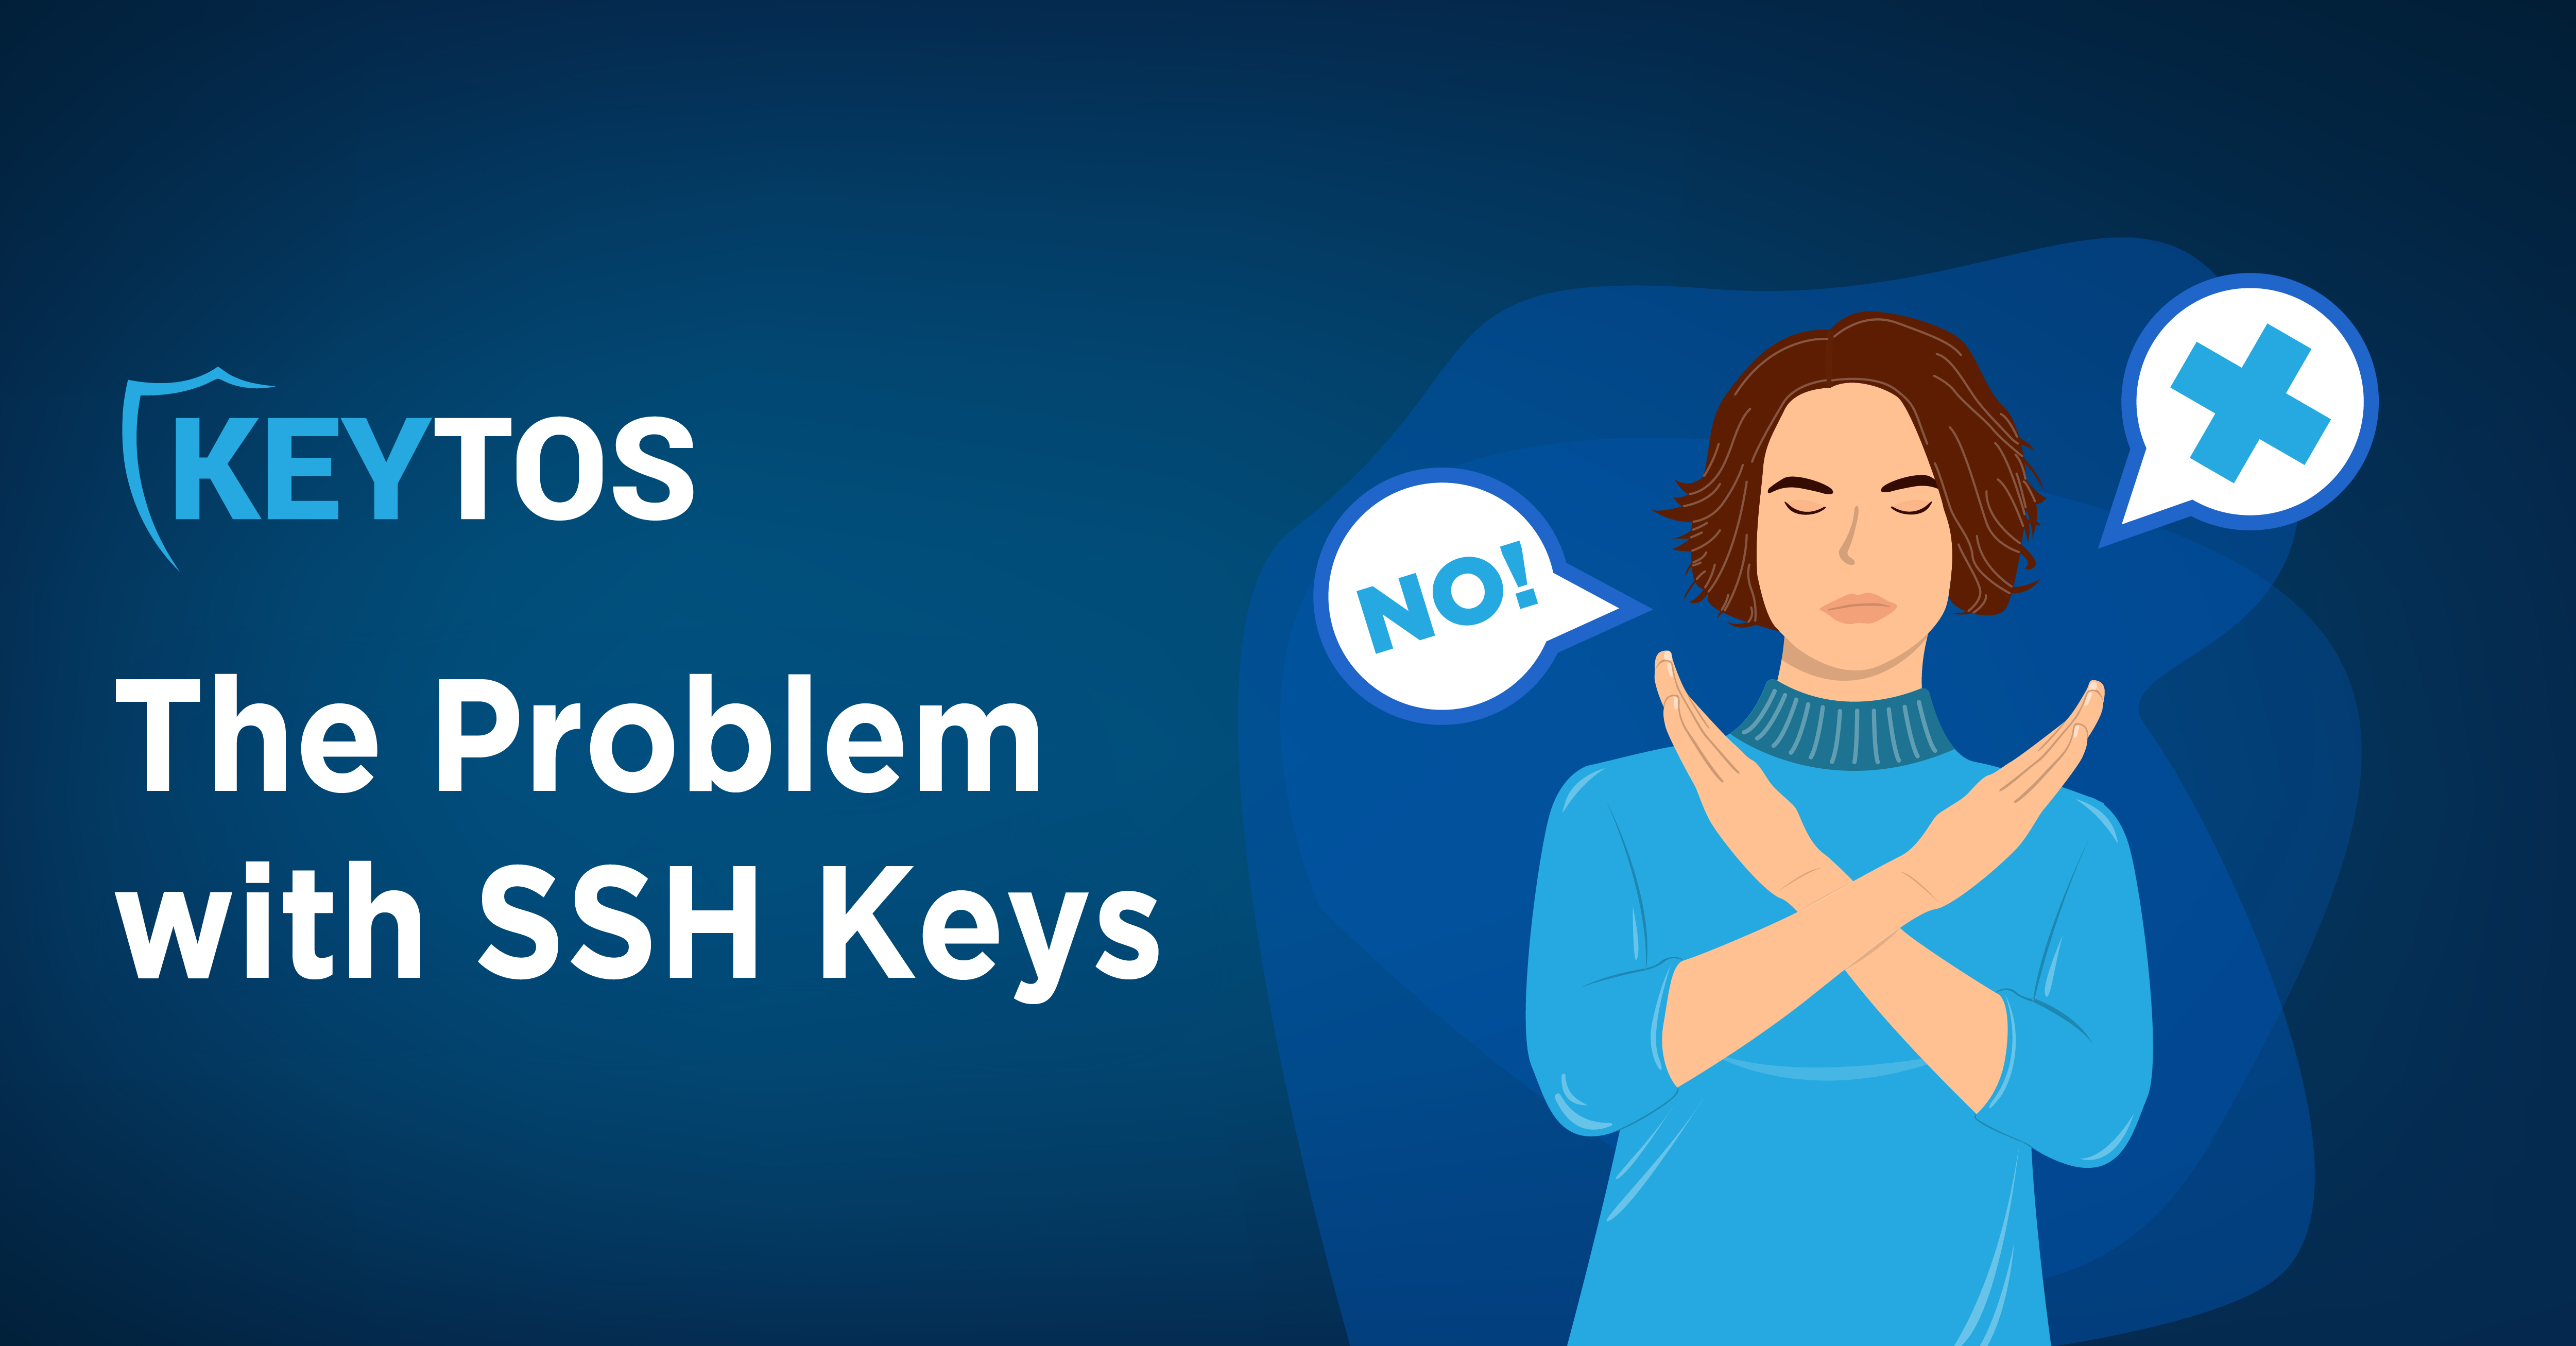 Why SSH Keys Are Bad